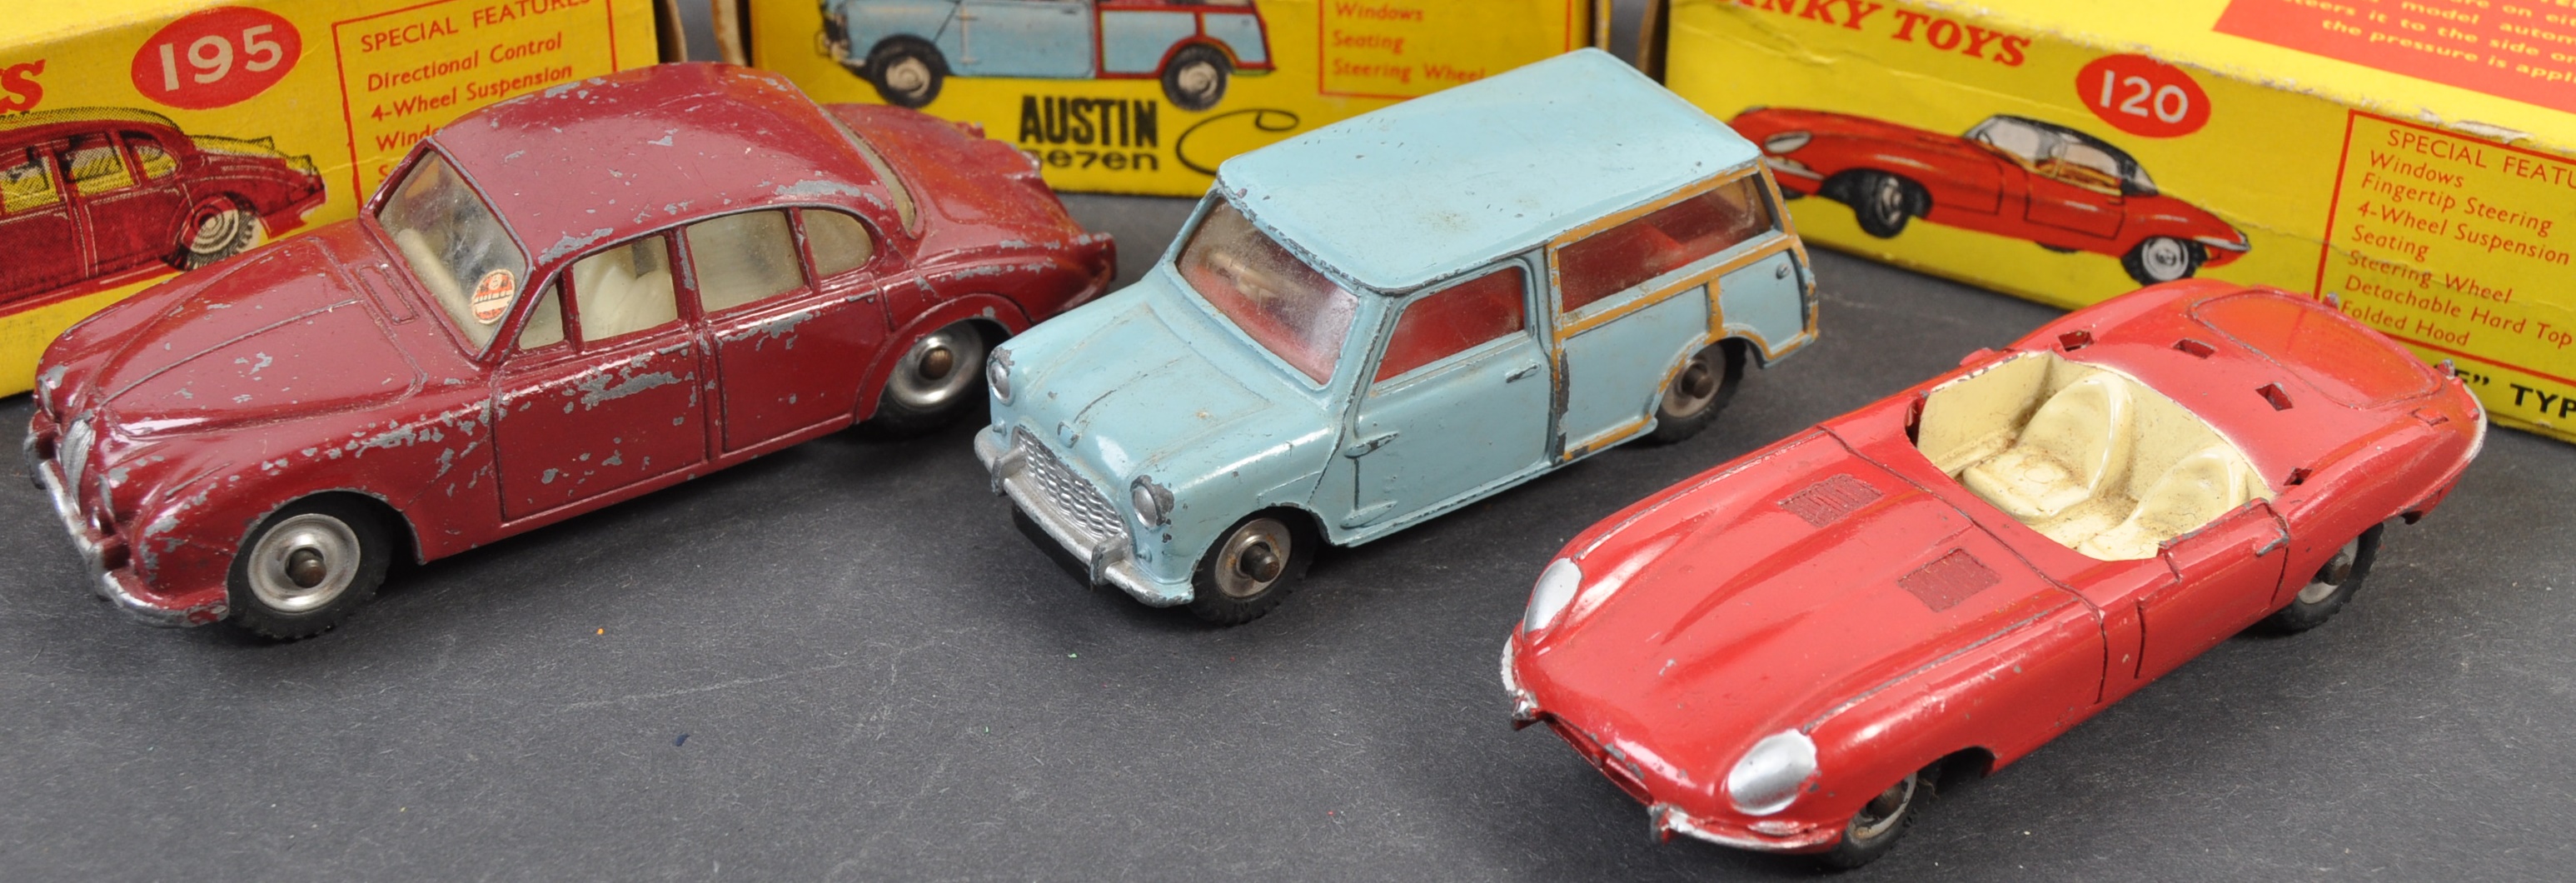 COLLECTION OF VINTAGE DINKY TOYS BOXED DIECAST MODELS - Image 2 of 4